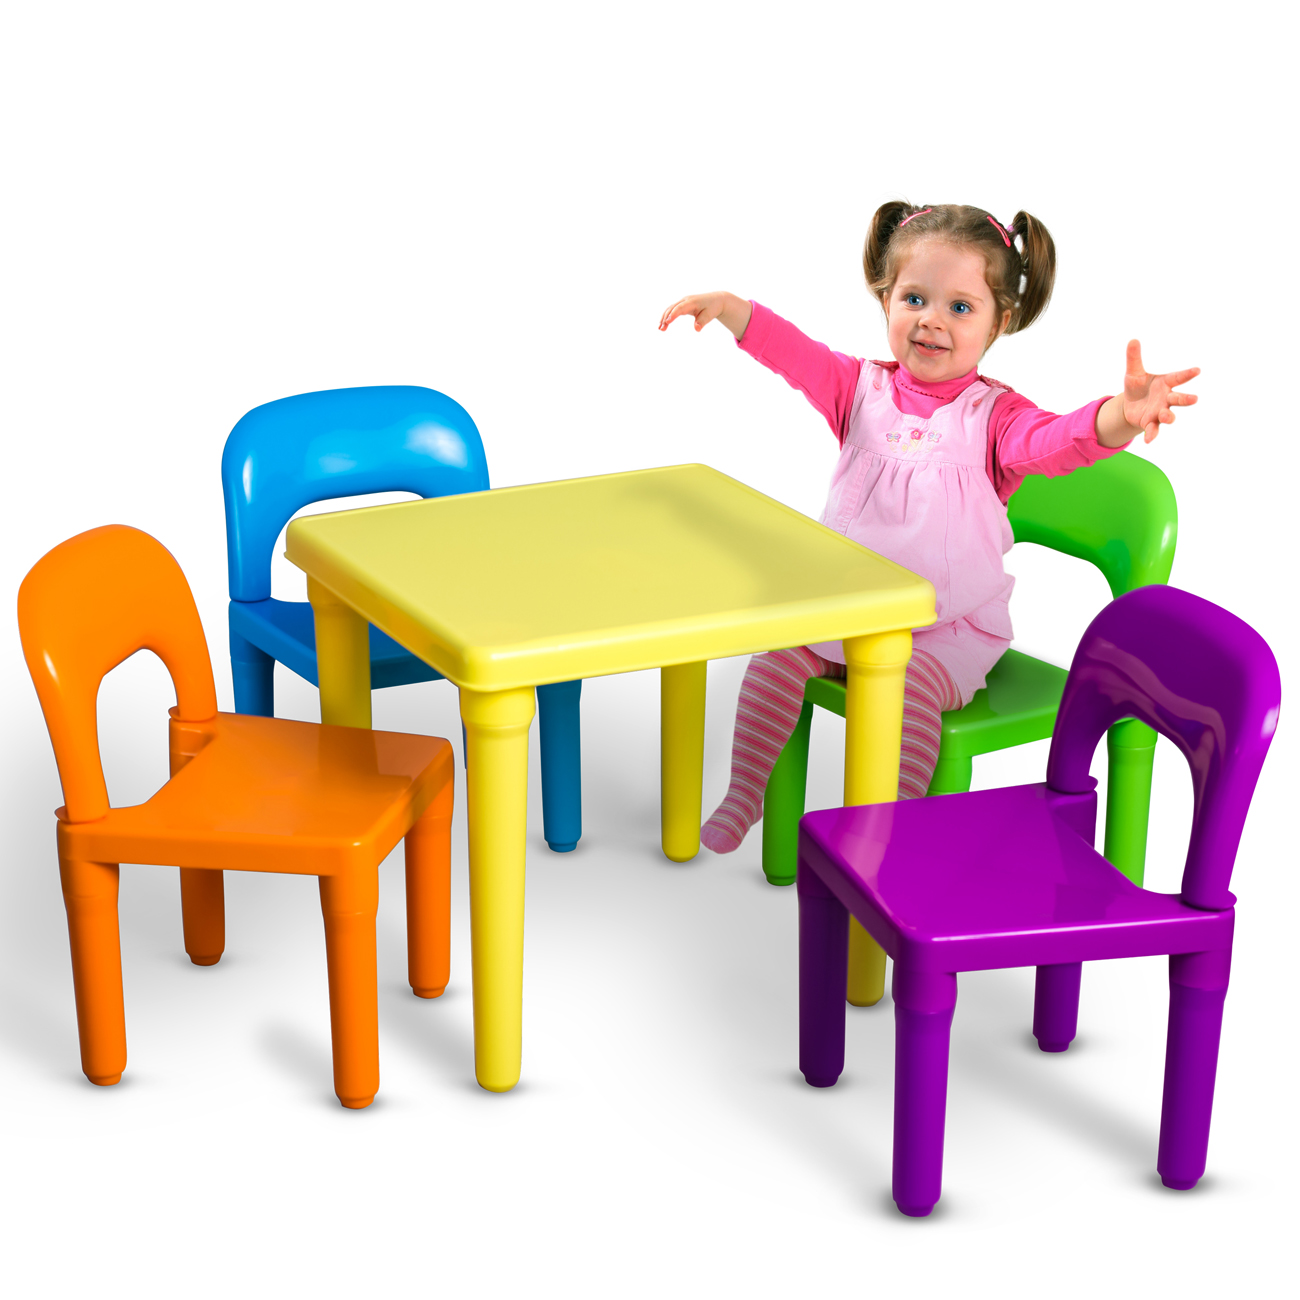 Kids table and chairs oxgord kids table and chairs play set for toddler child toy activity ACMSUFZ